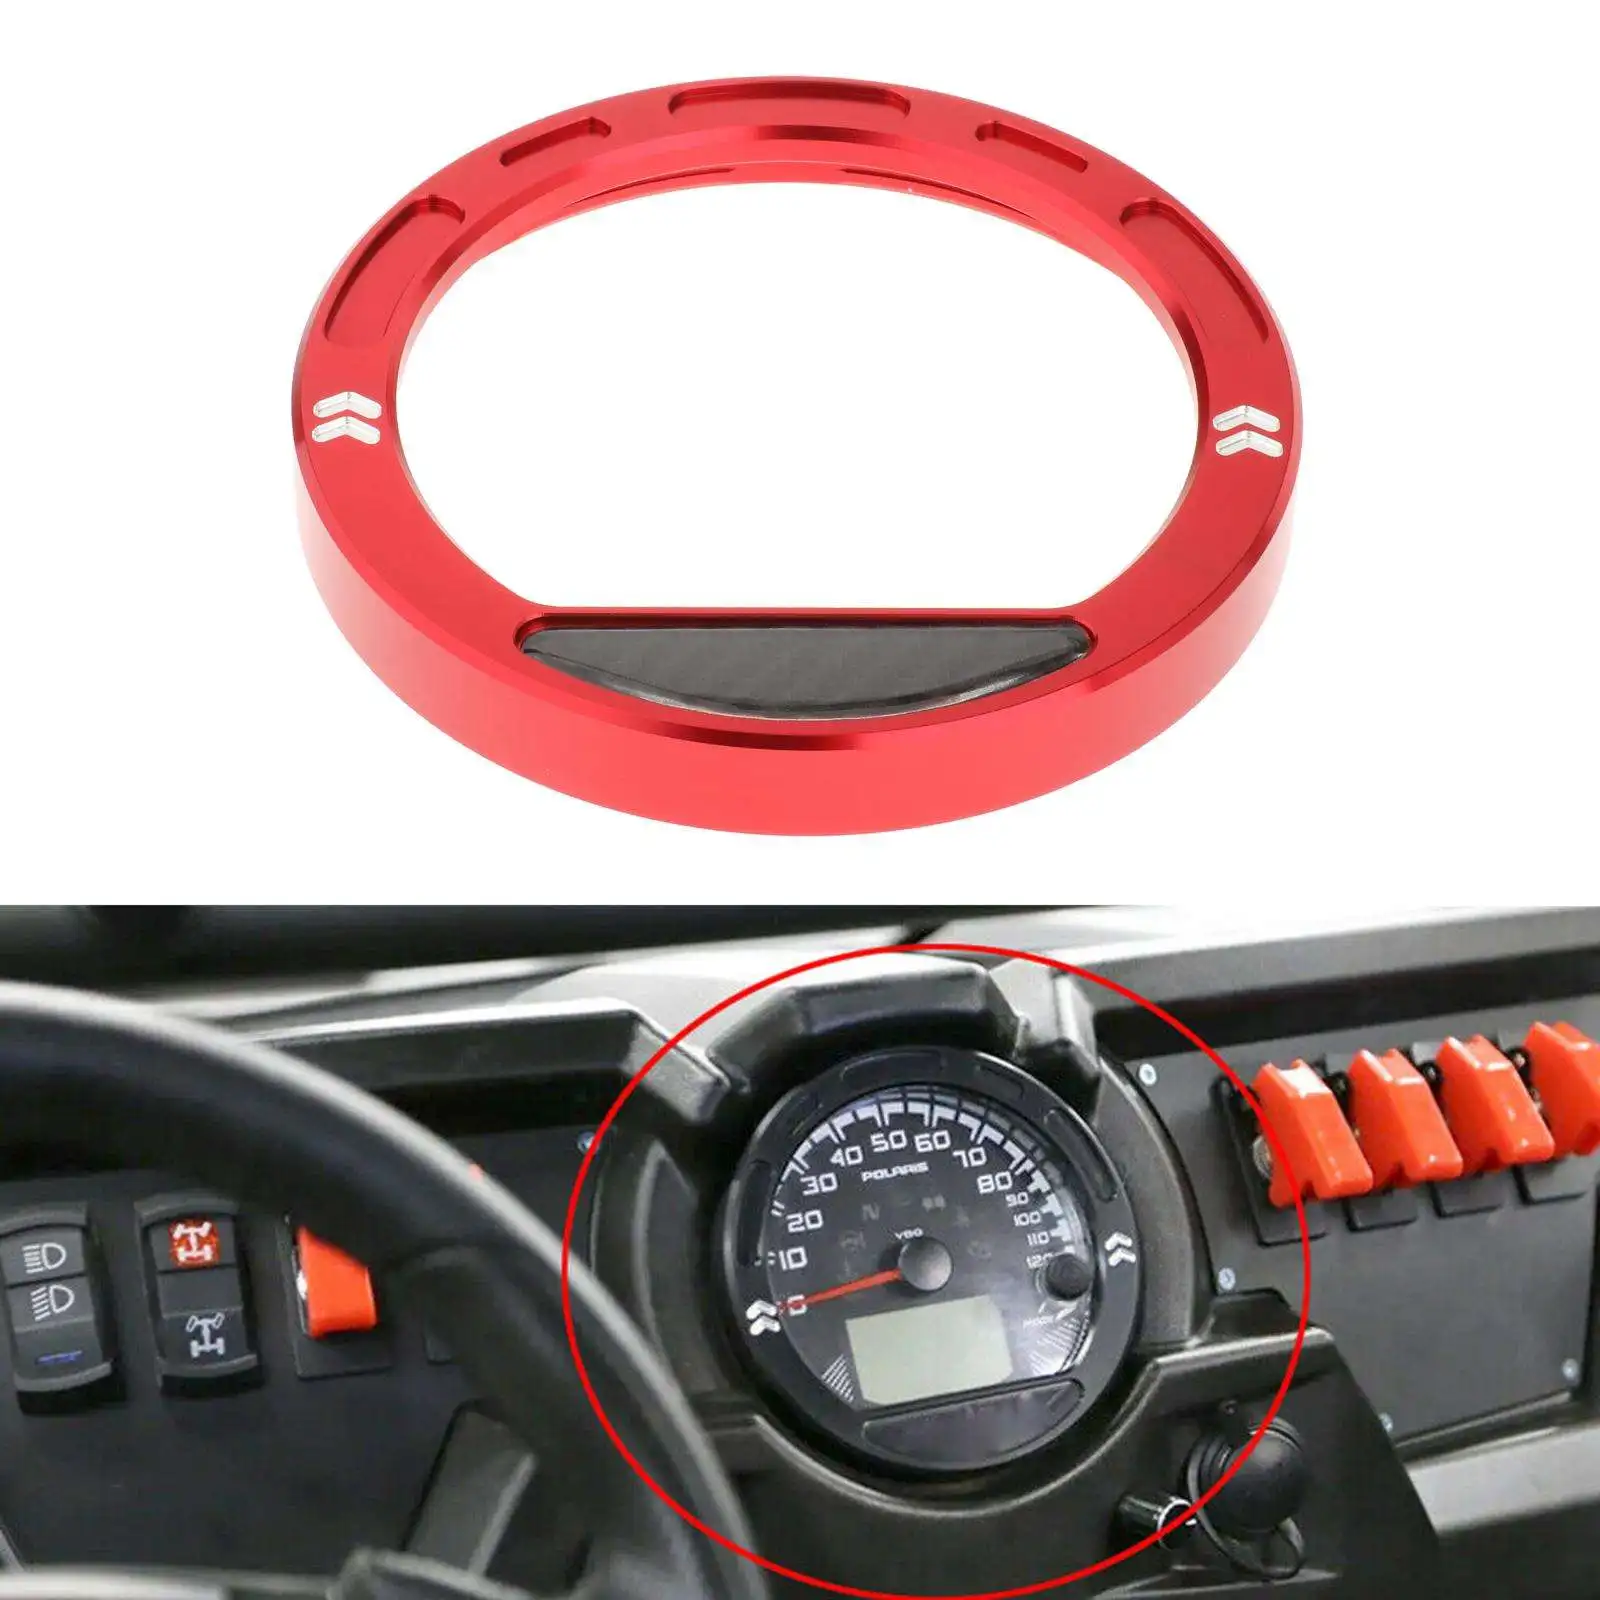 Motorcycle Speedometer Guage Bezel Cover Trim Replacement for Polaris RZR 570 800 900 RZR 1000